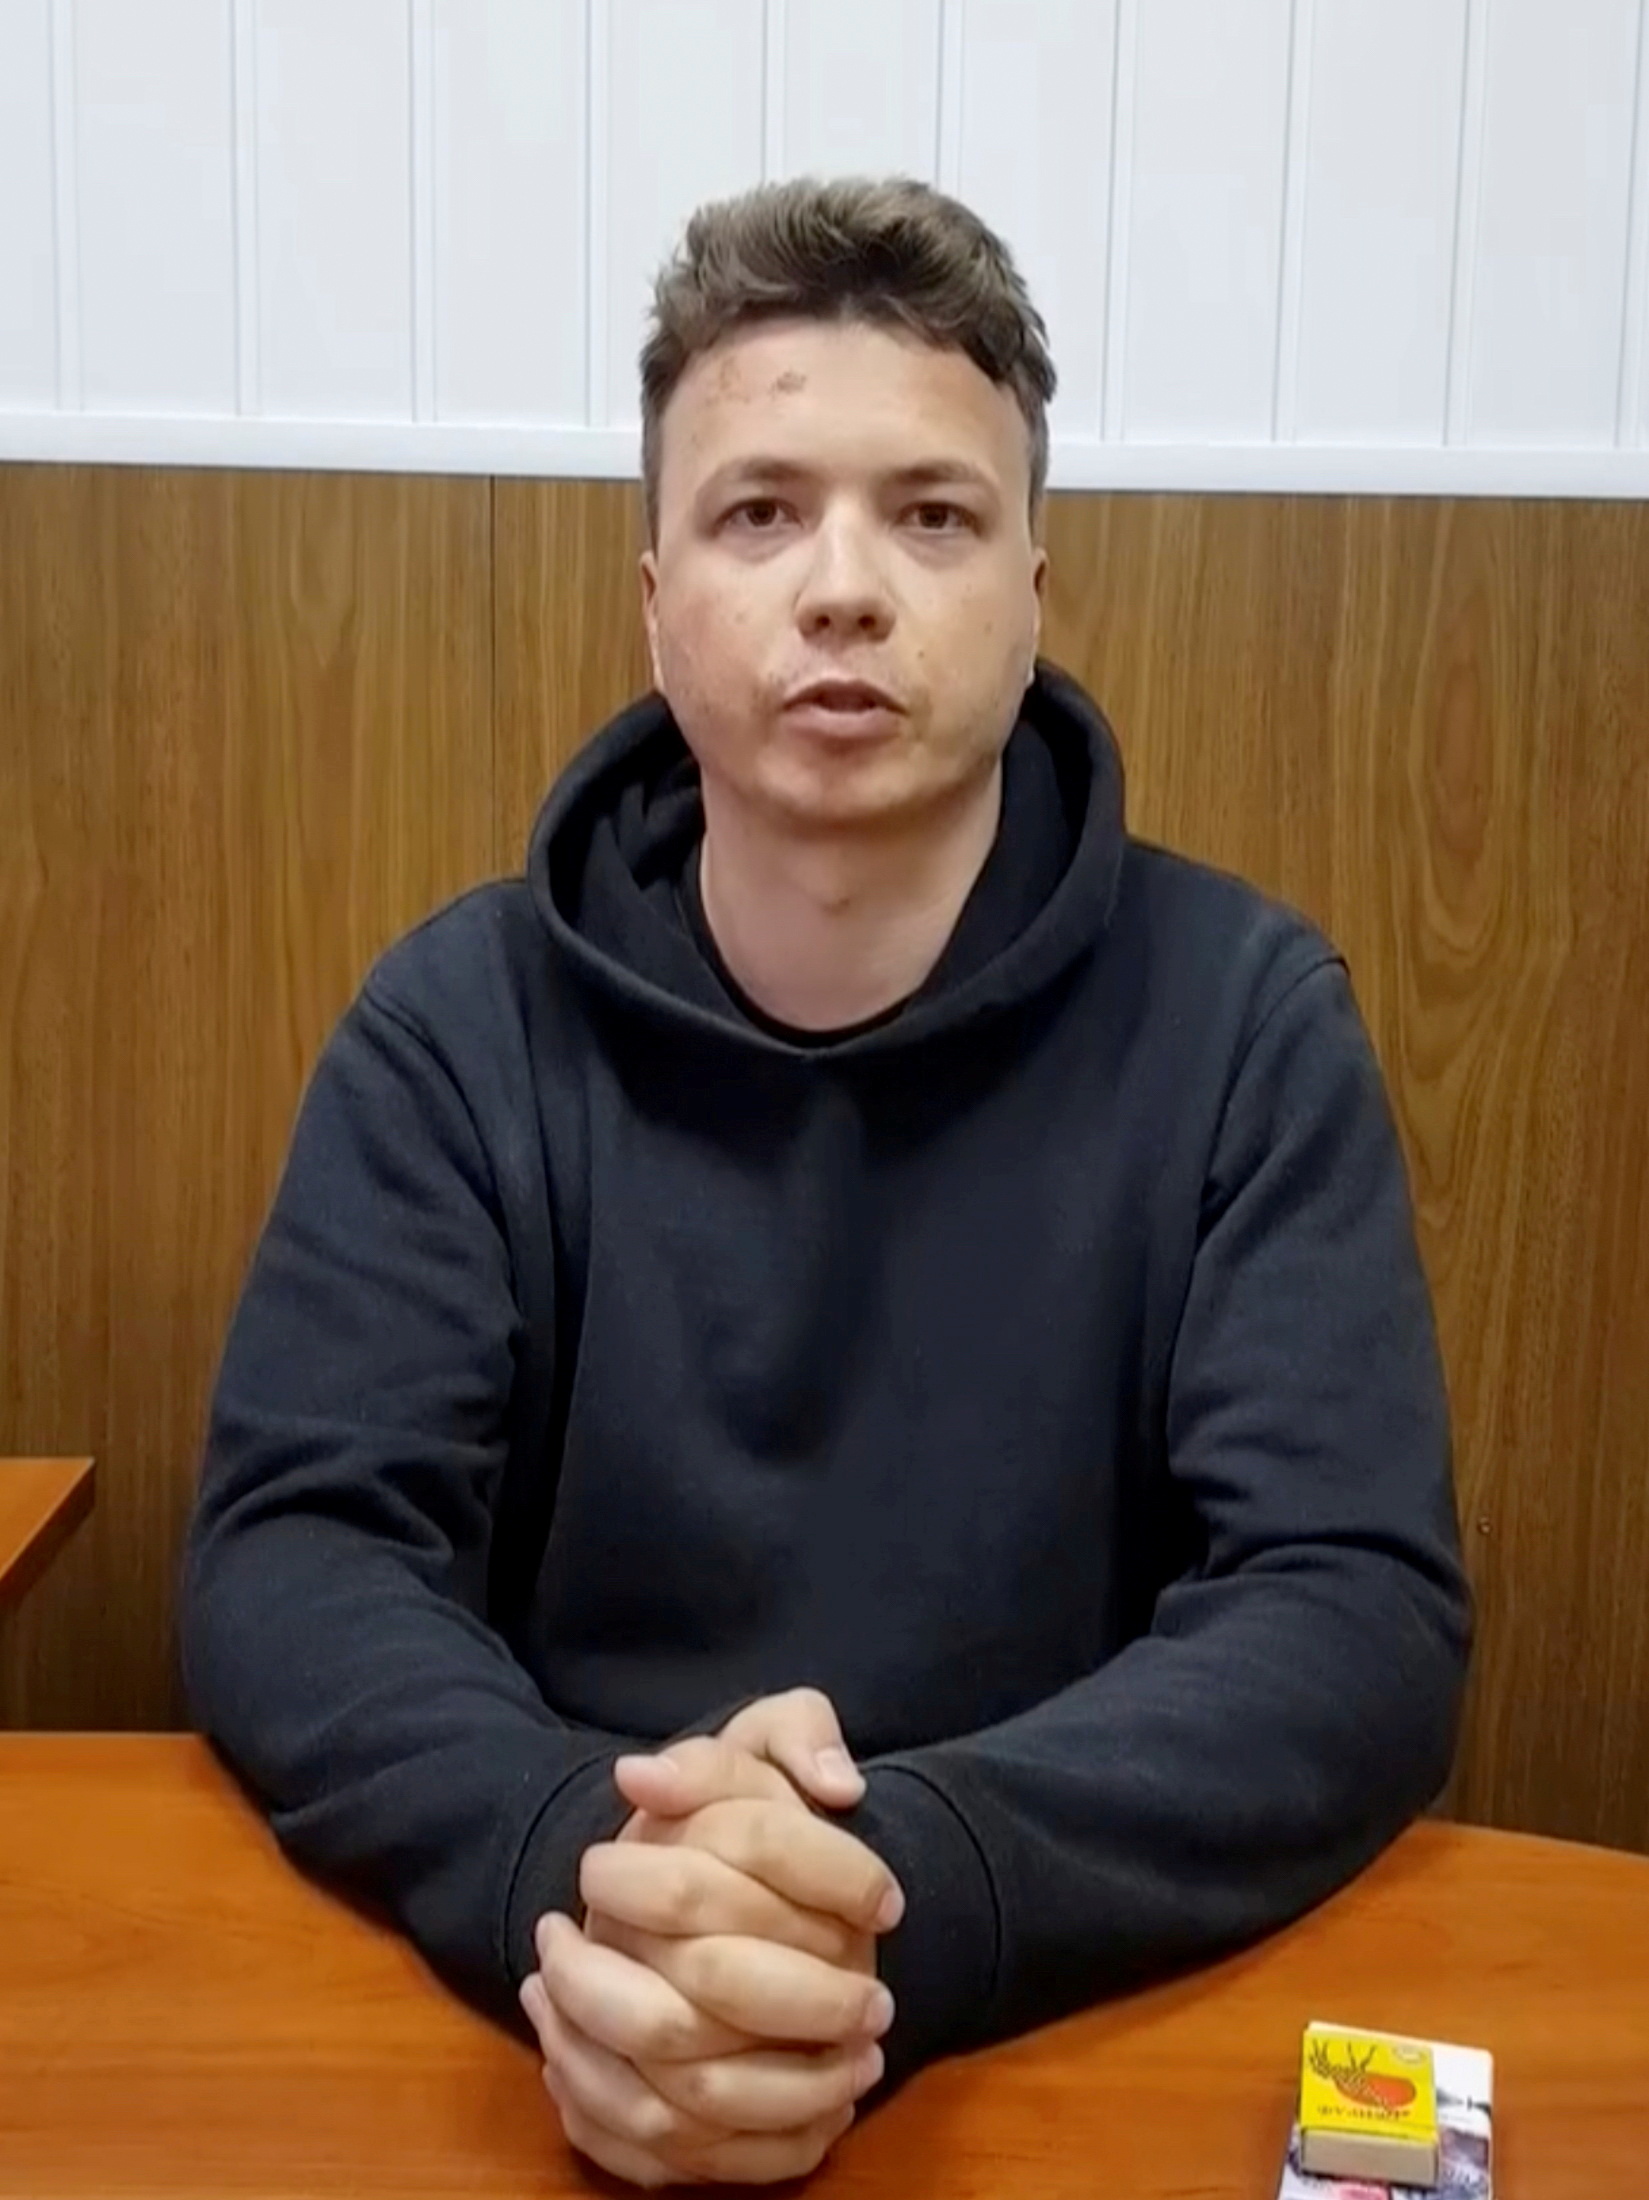 Belarusian blogger Roman Protasevich, detained when a Ryanair plane was forced to land in Minsk, is seen in a pre-trial detention facility, as he says, in Minsk, Belarus May 24, 2021 in this still image taken from video. Telegram@Zheltyeslivy/Reuters TV/via REUTERS T